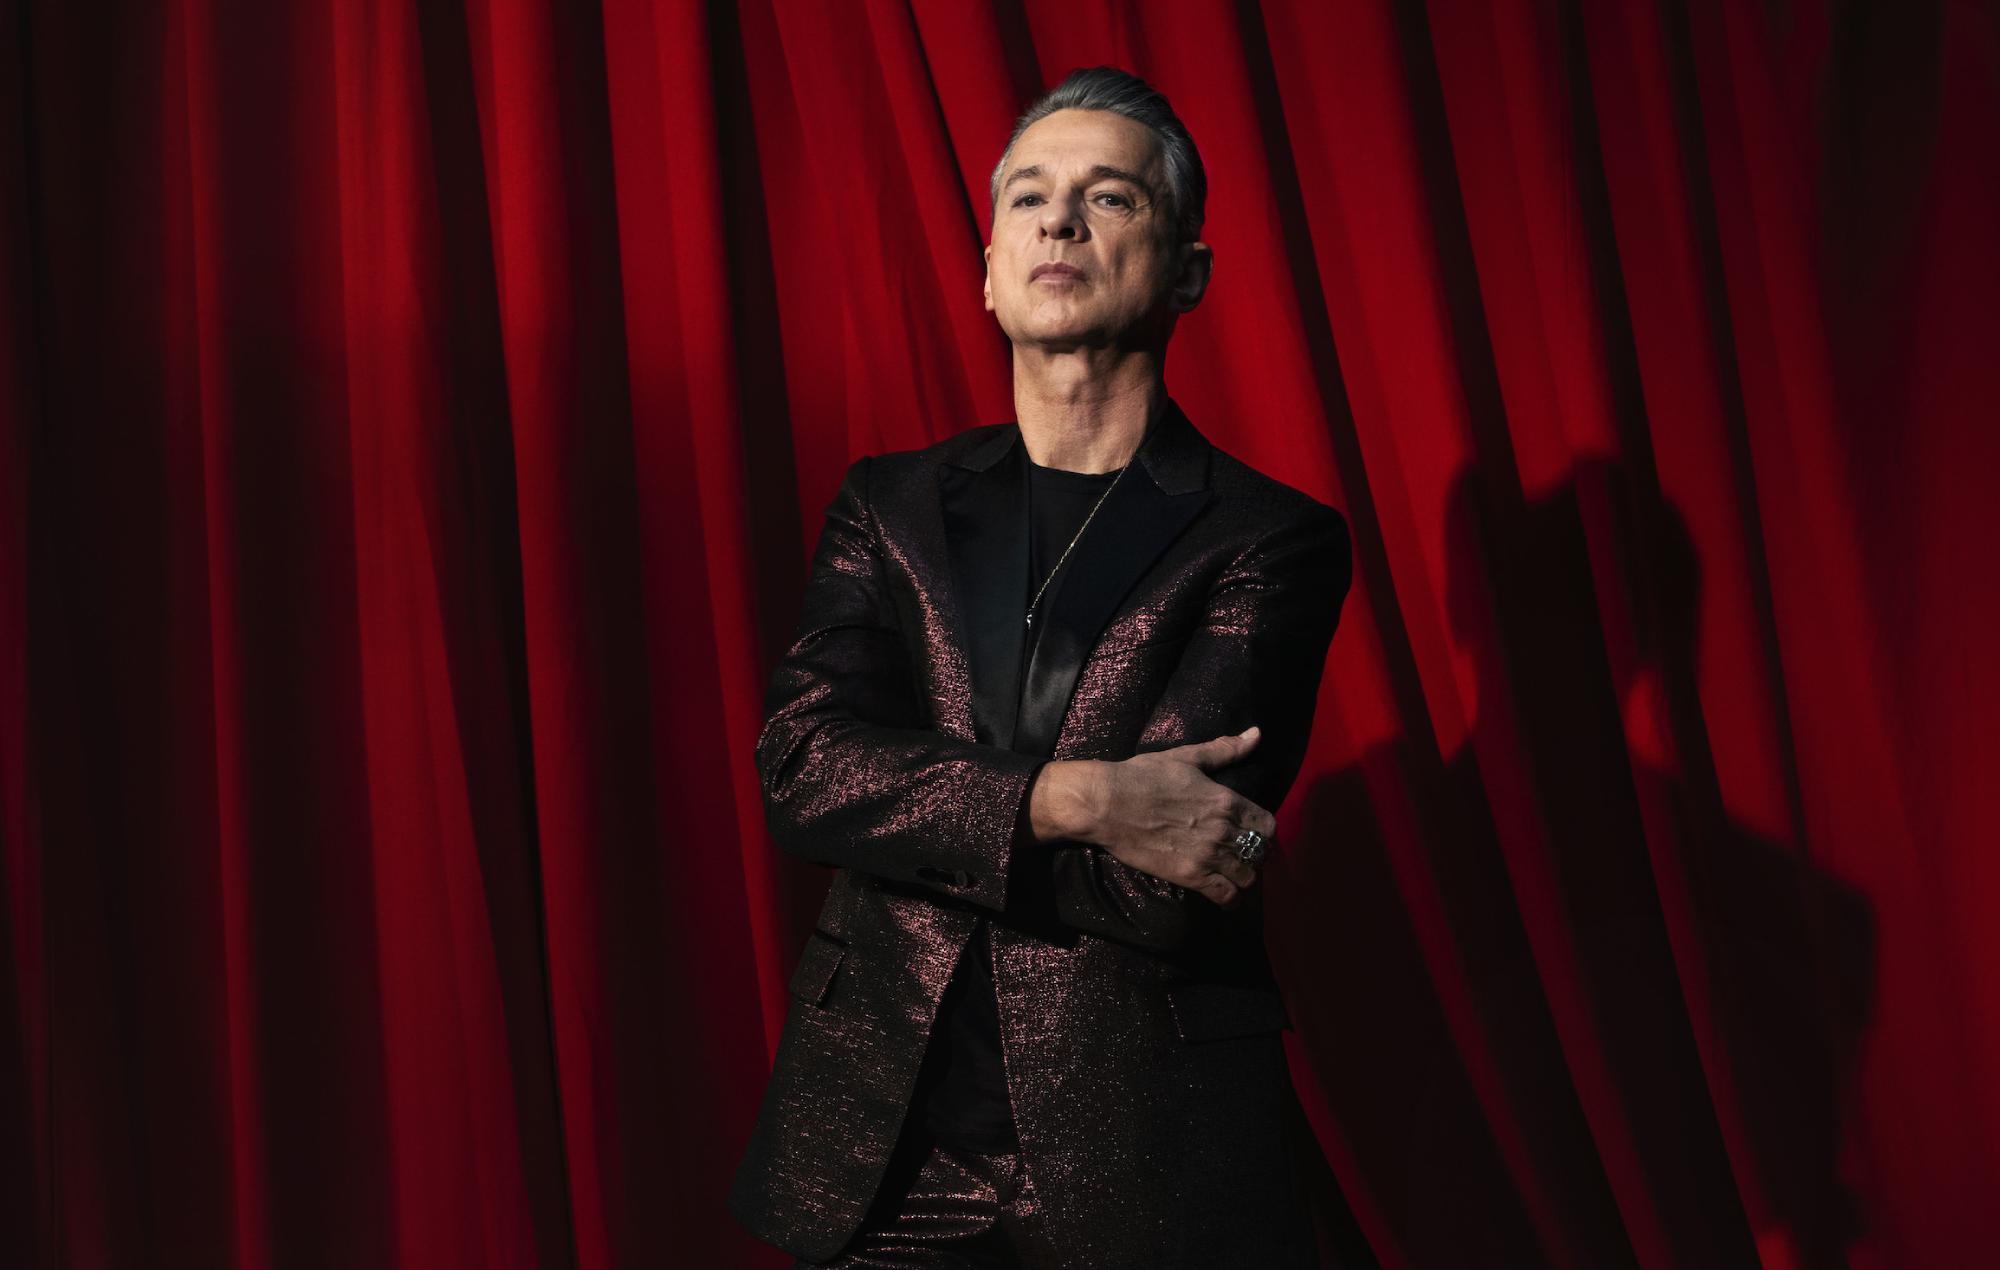 Dave Gahan covers Cat Power and tells us about his “liberating” new album and the future of Depeche Mode